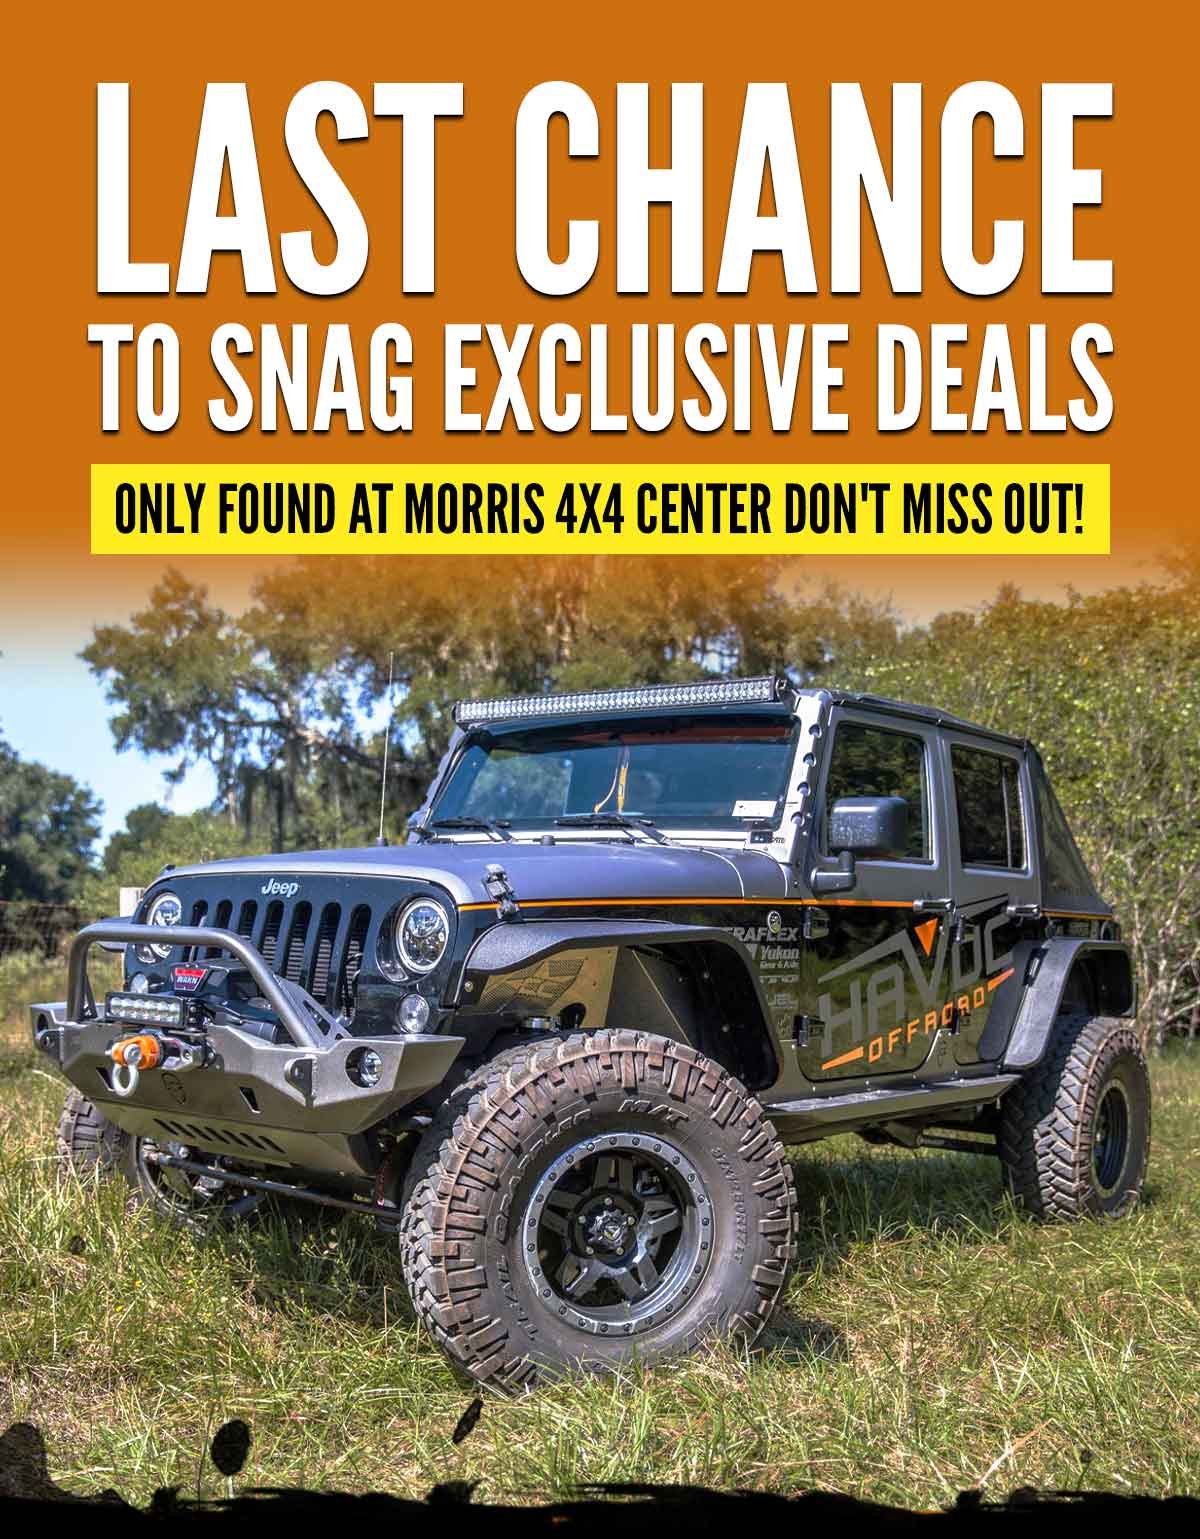 Last Chance To Snag Exclusive Deals Only Found At Morris 4x4 Center Don't Miss Out!